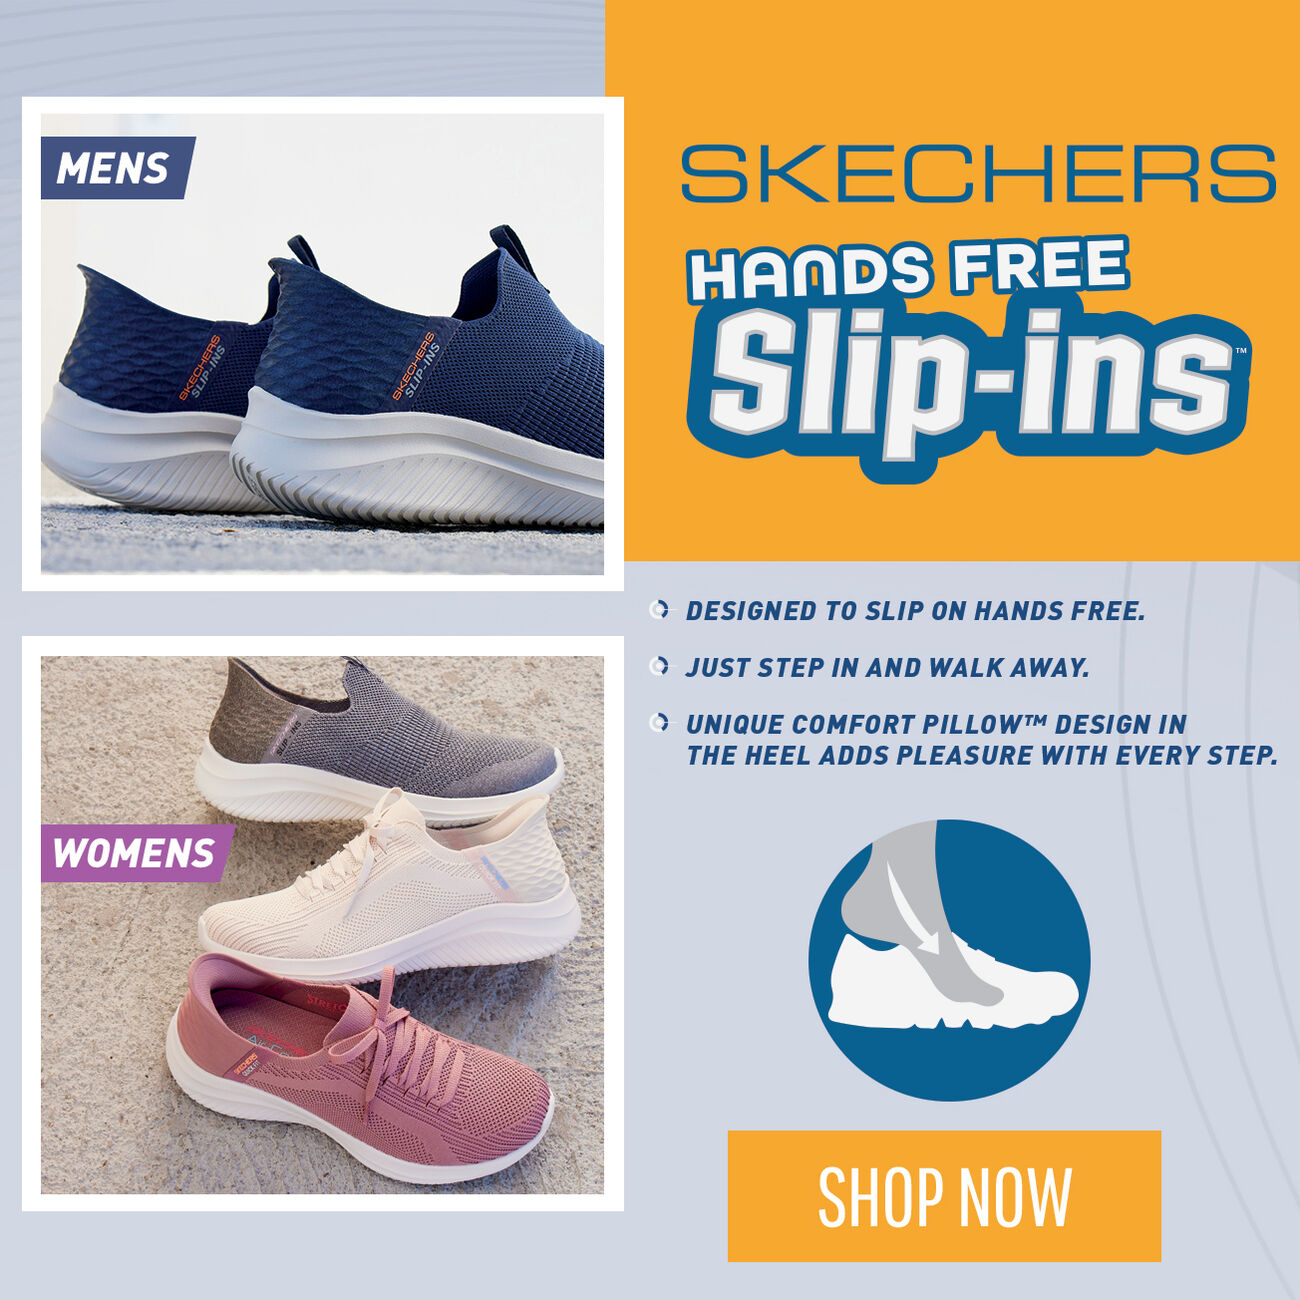 Skechers India - Official Site for best walking shoes, running shoes & more